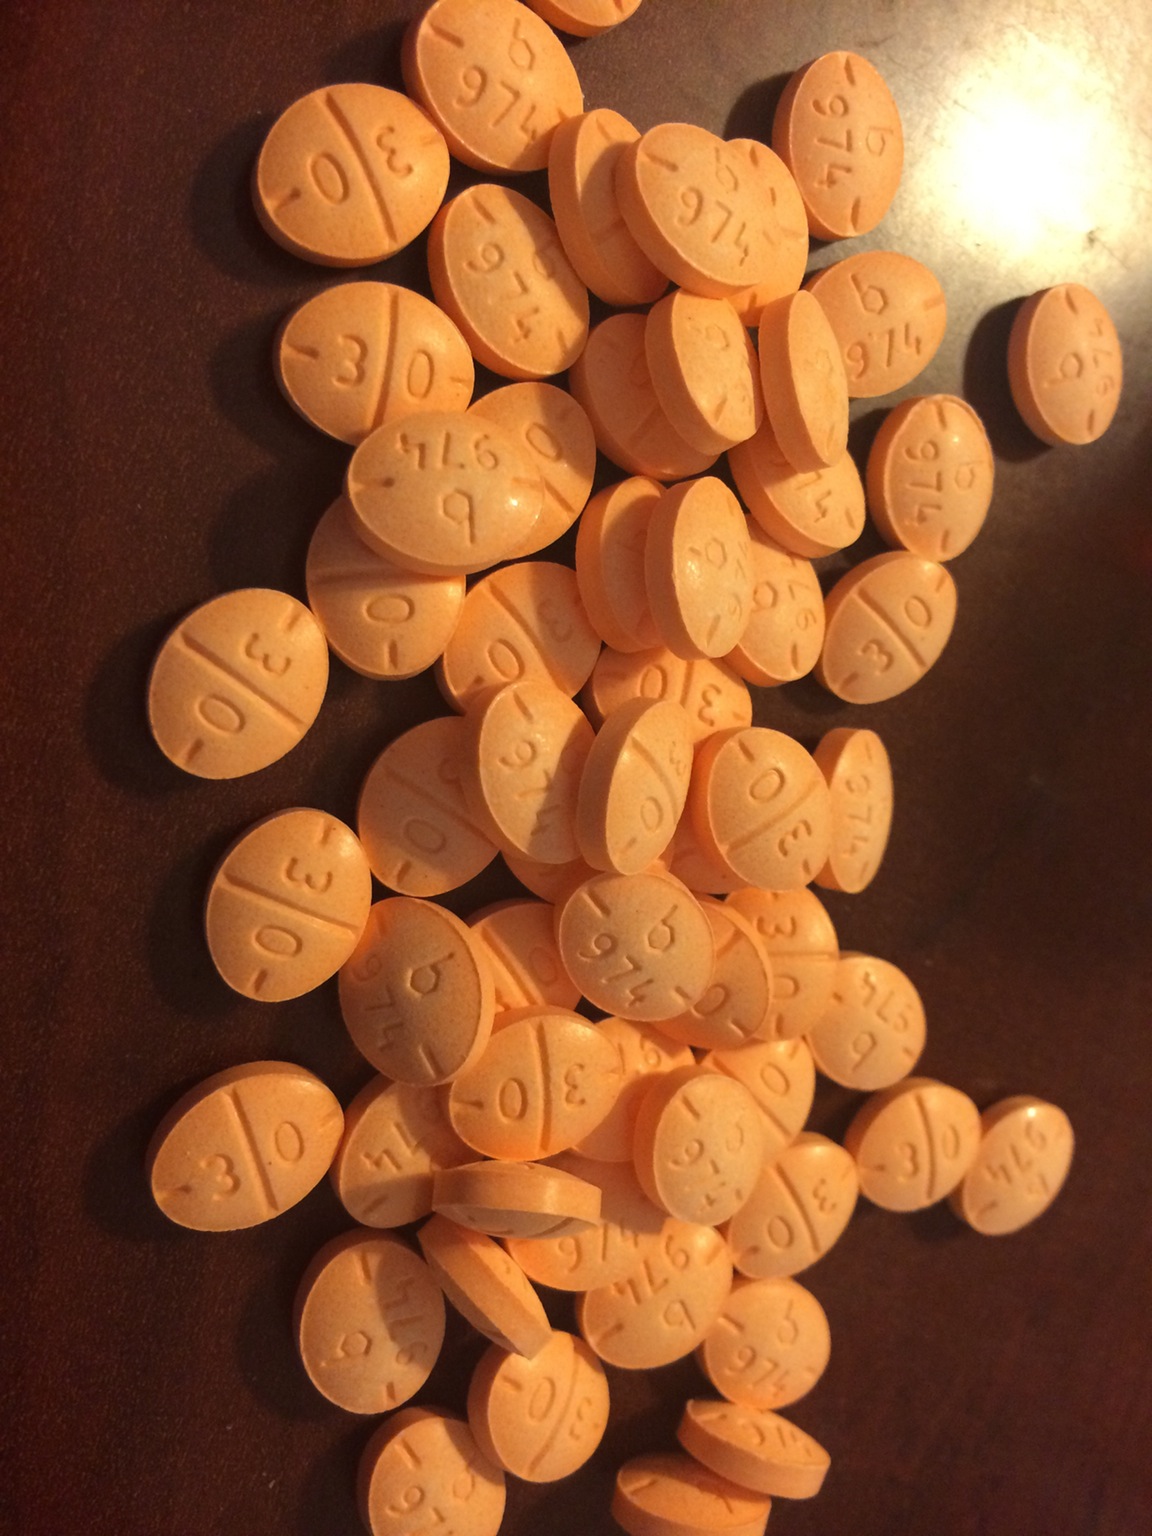 Best Place to Buy Adderall Online